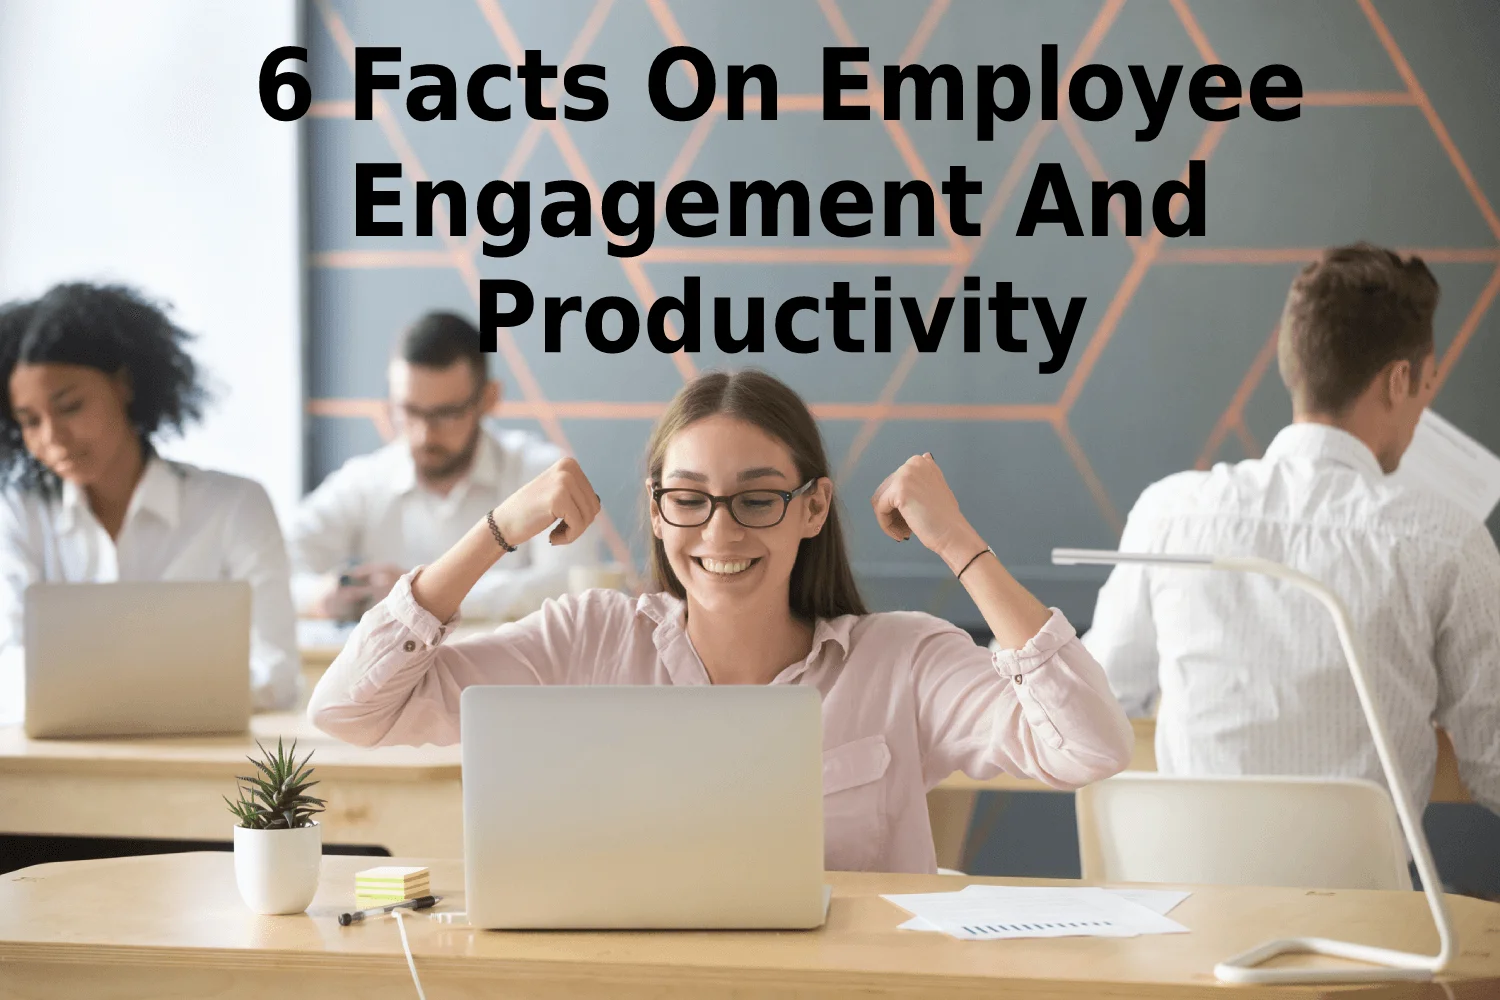 6 Facts On Employee Engagement